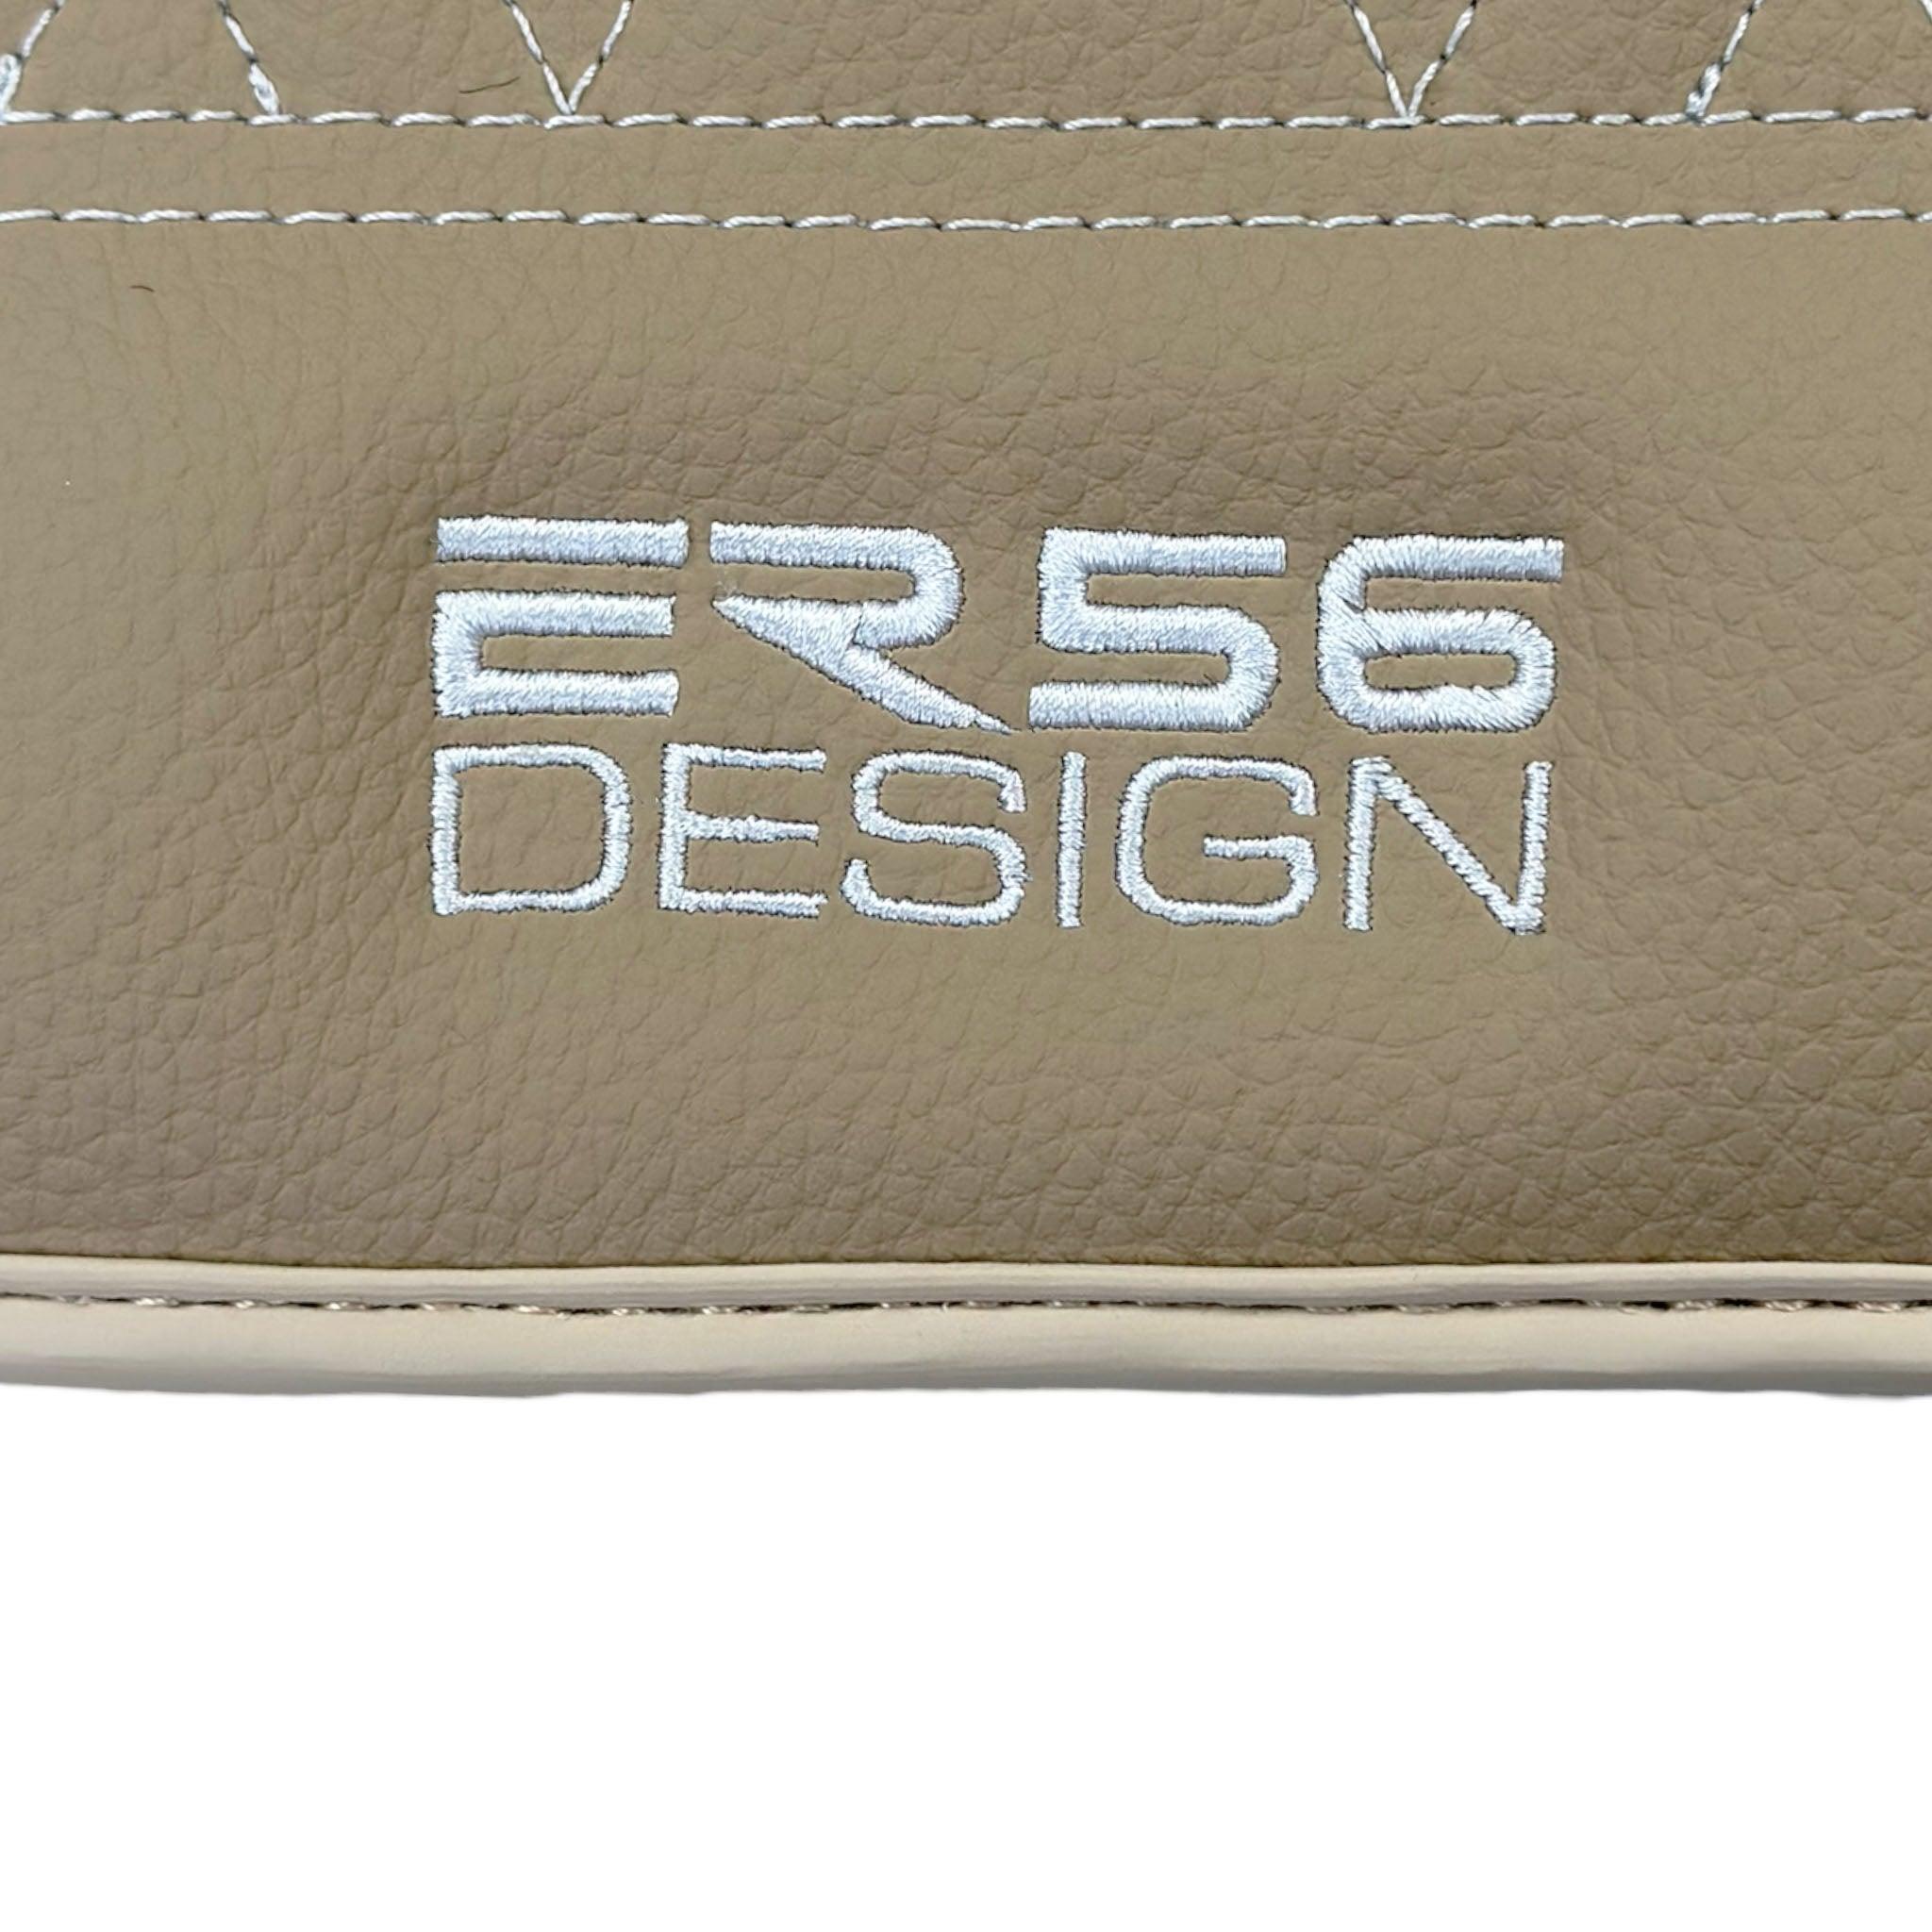 Beige Leather Floor Mats For BMW 7 Series E38 | Fighter Jet Edition